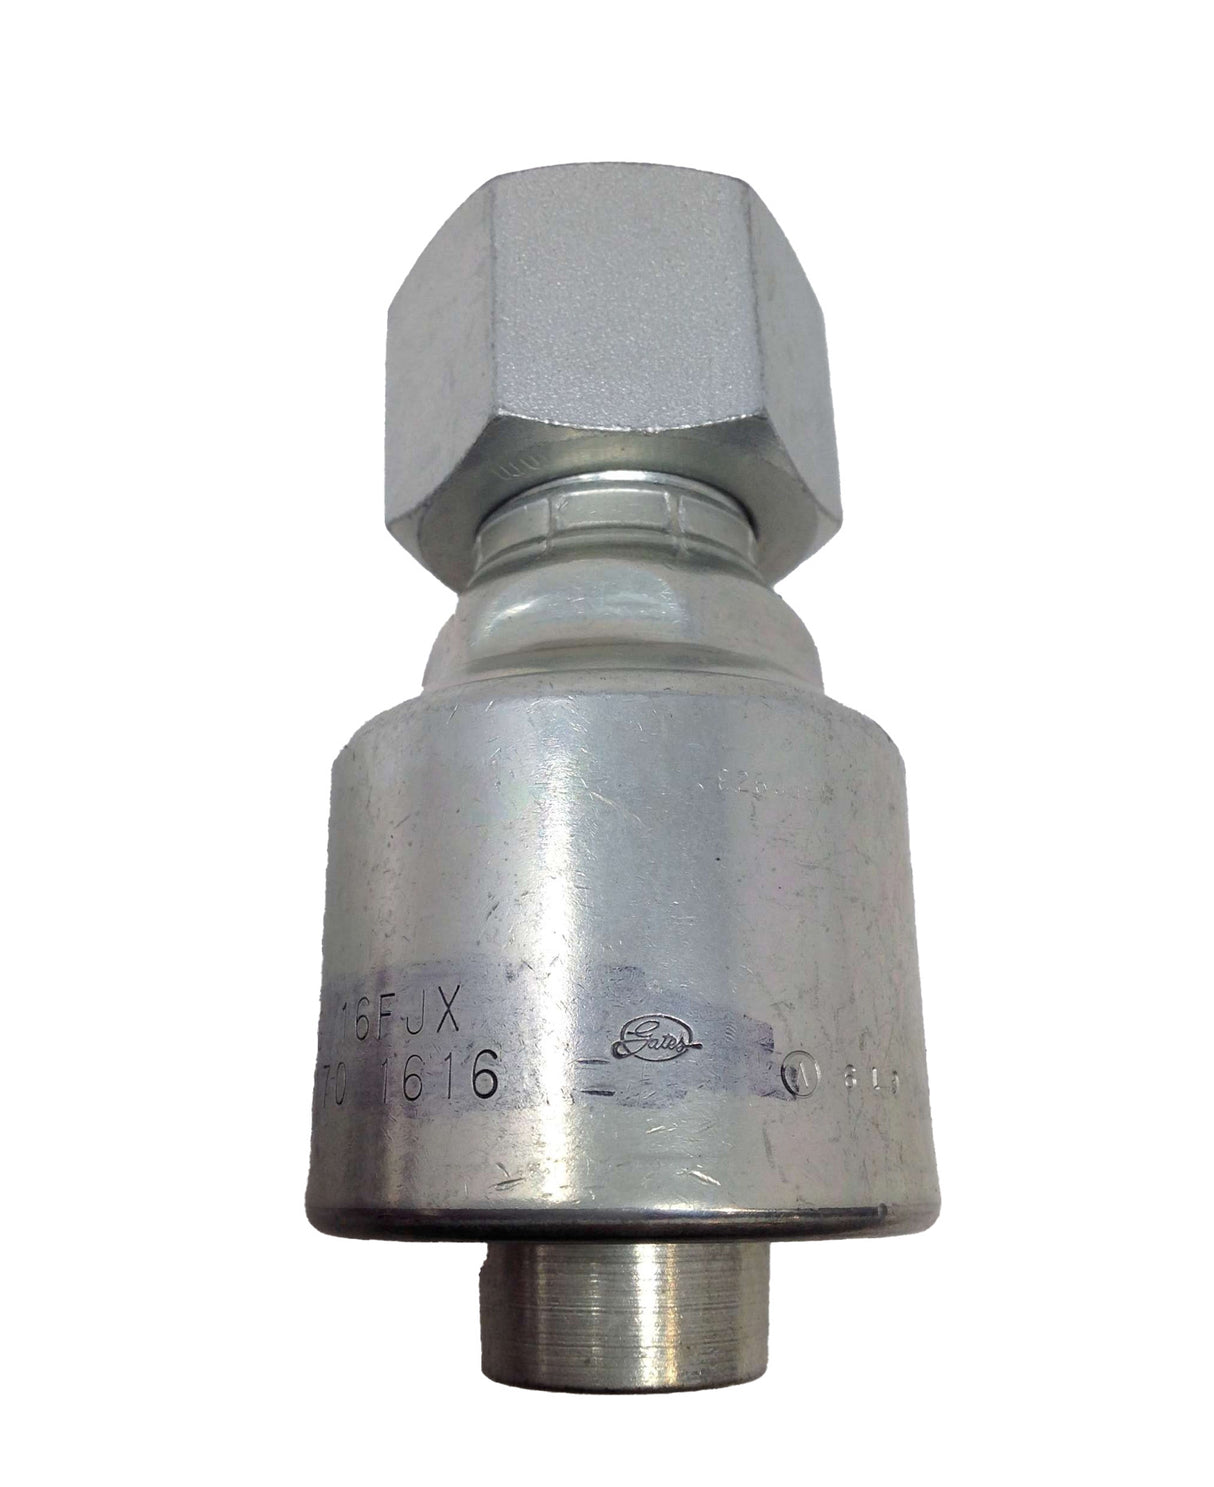 GATES CORP ­-­ G25170-1616 ­-­ FITTING 1in HOSE X 1in F JIC FLARE SWIVEL